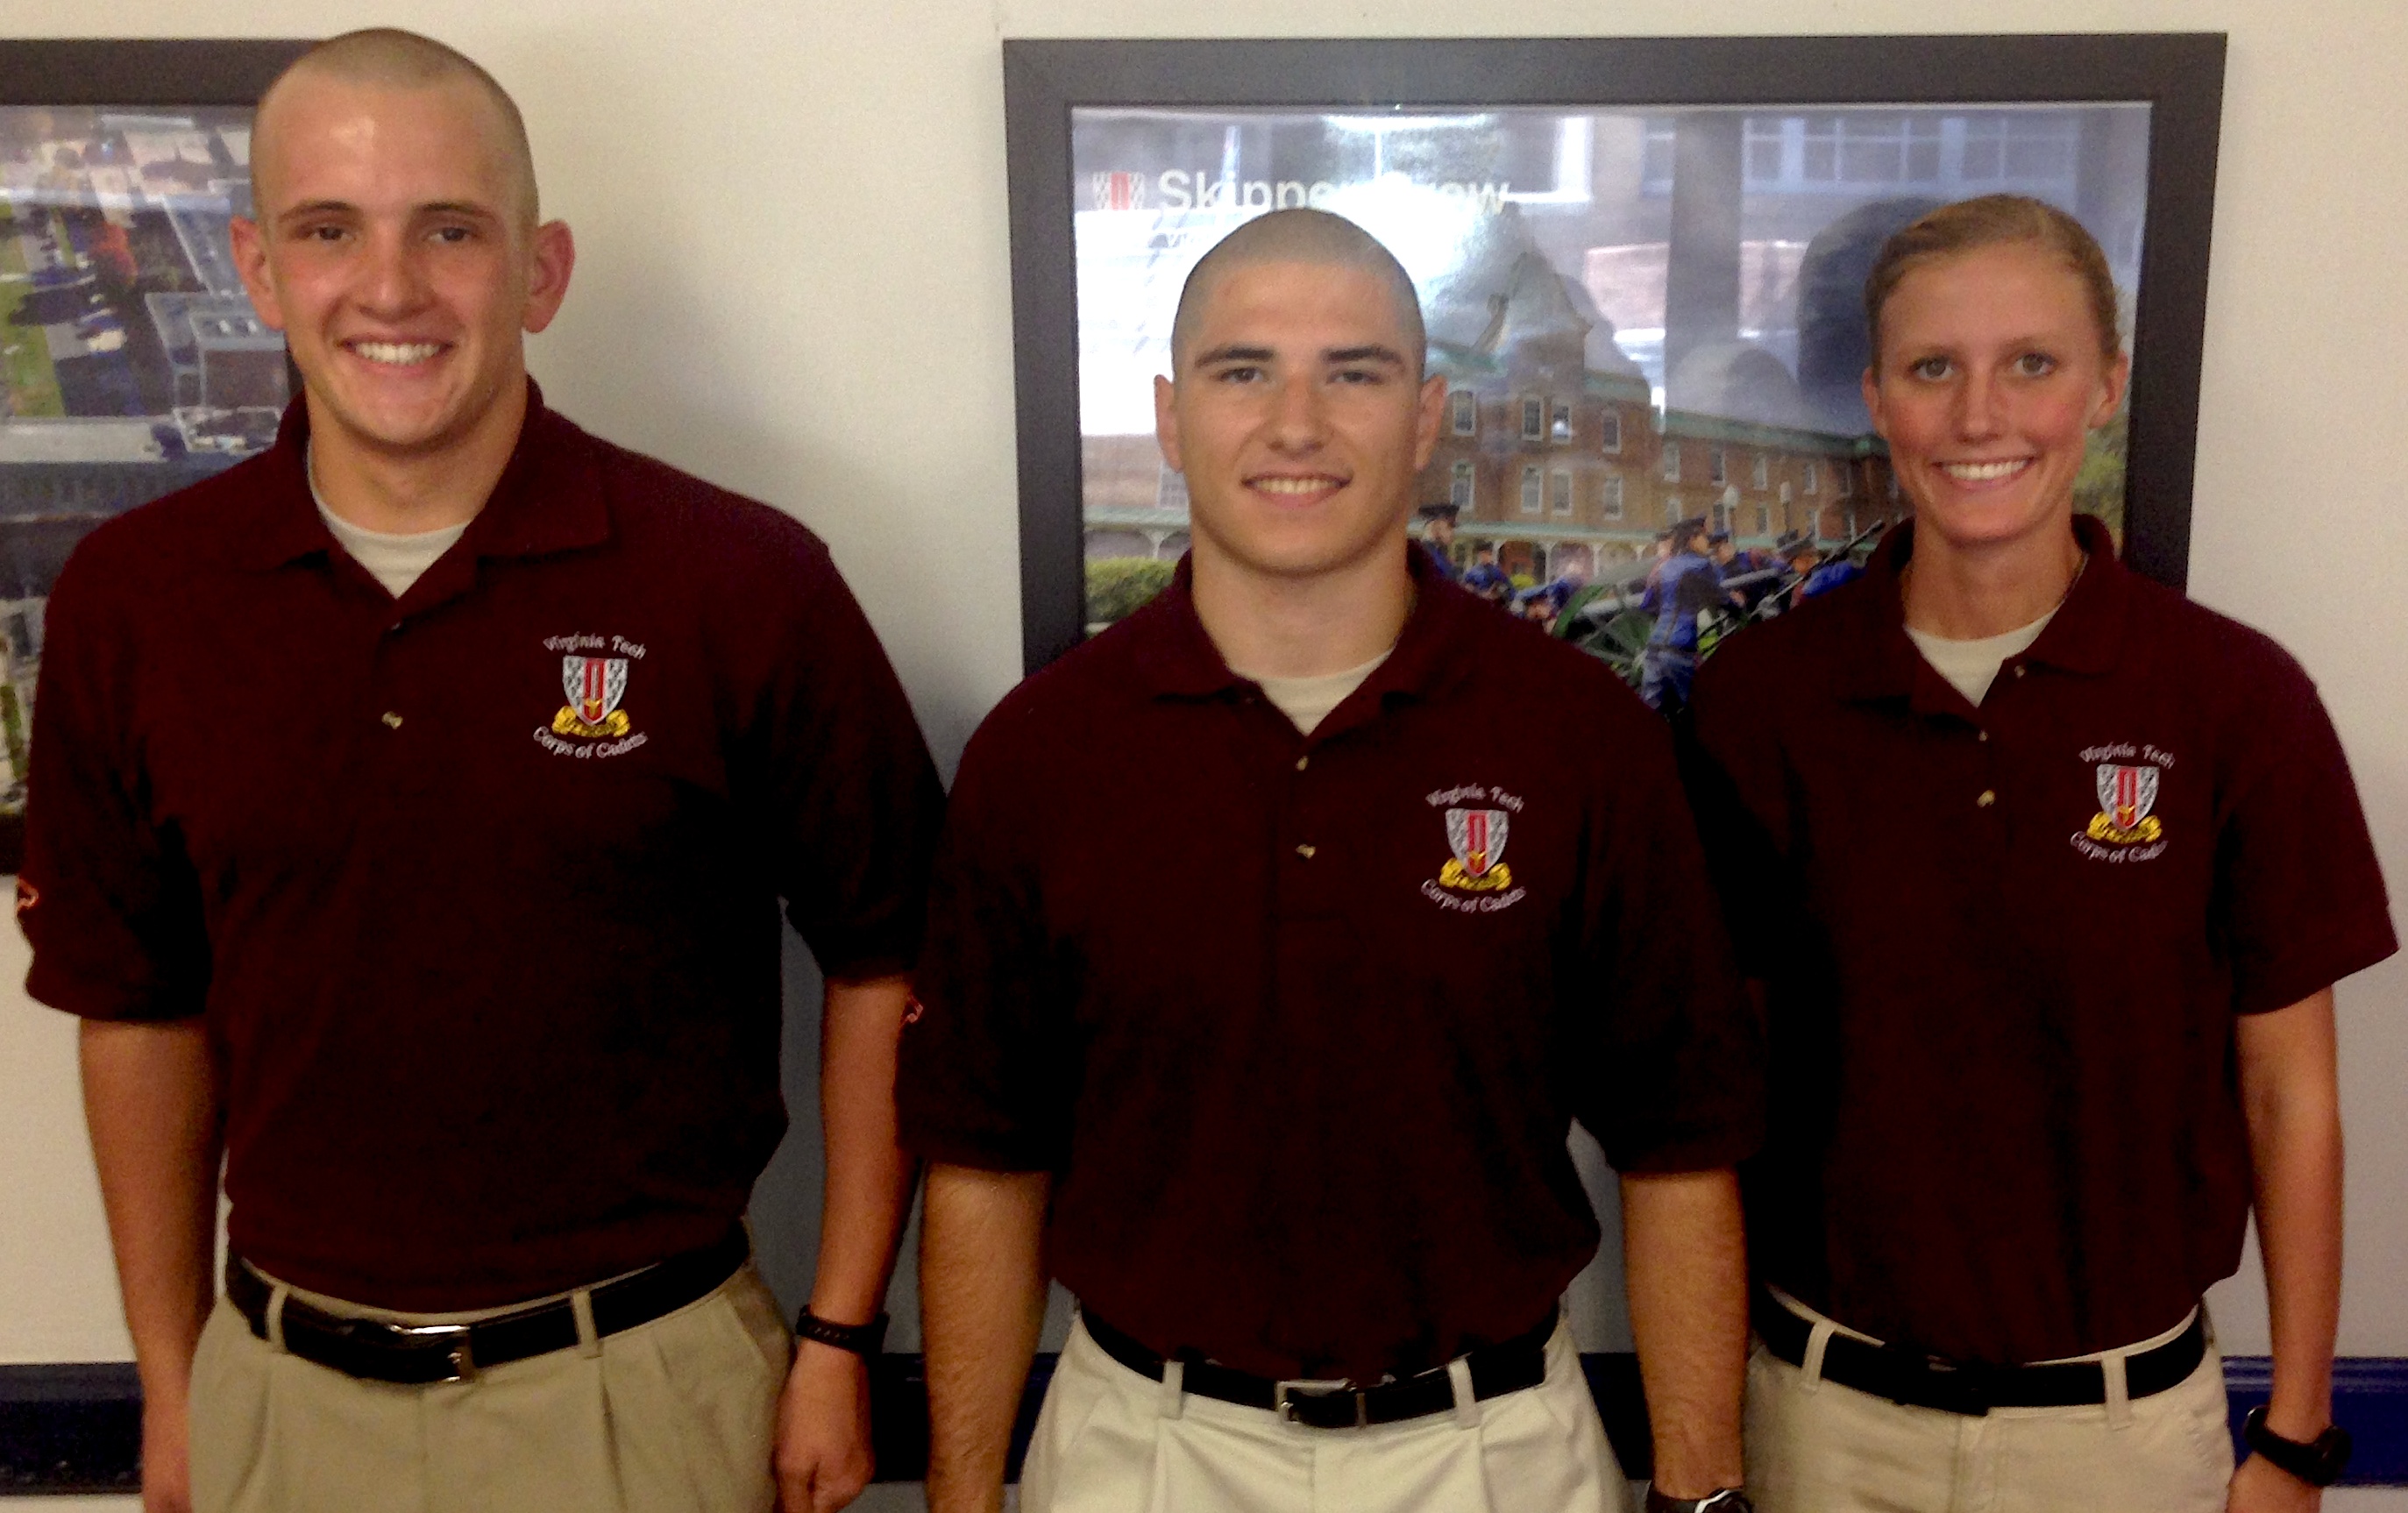 From left to right are Cadets Benjamin Scholz, Brandon Robertello, and Megan Crouch.